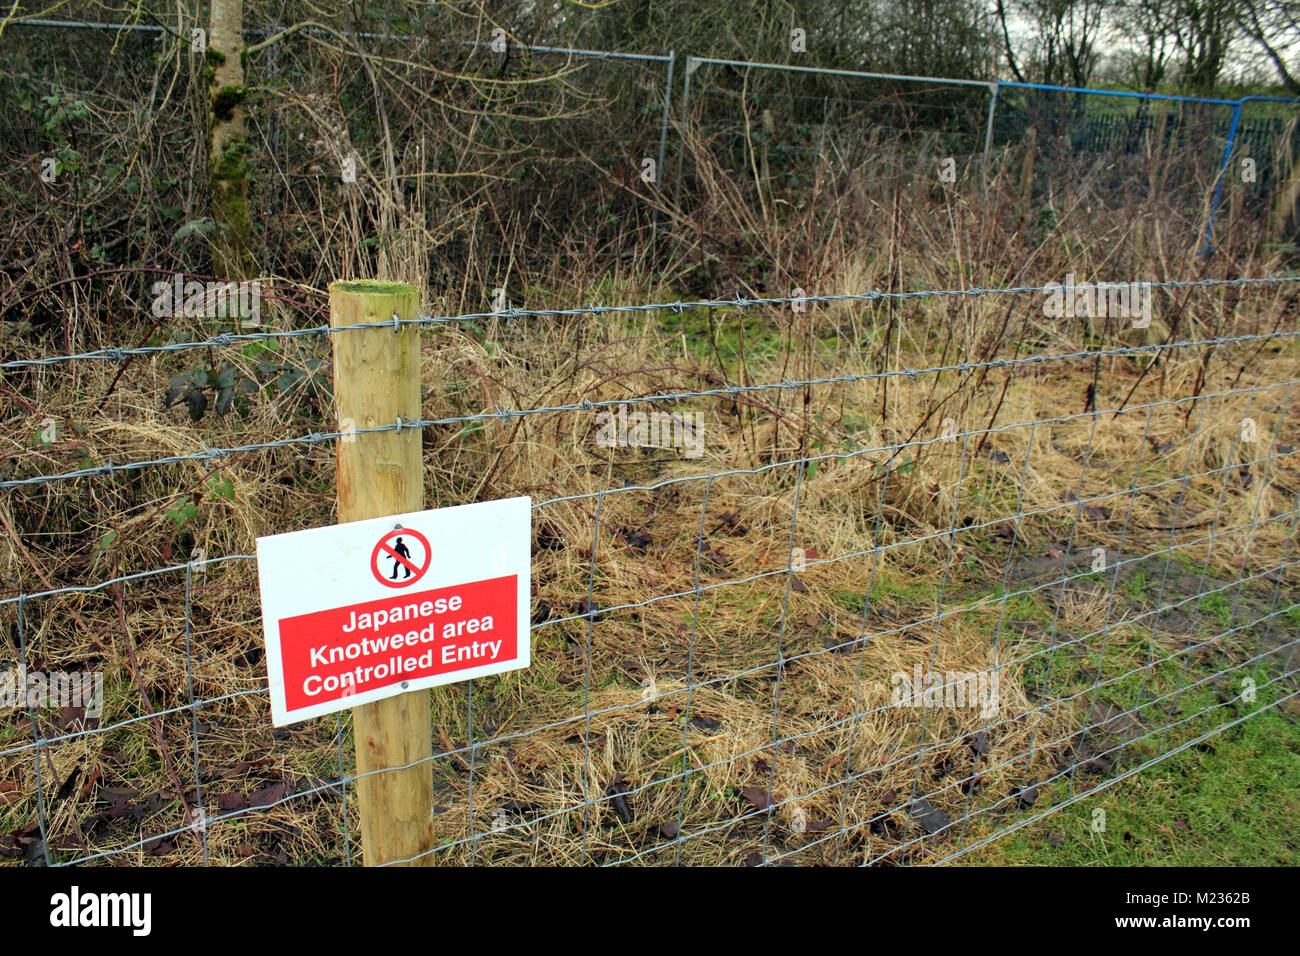 Area containing Japanese Knotweed with no-entry warning sign Stock Photo